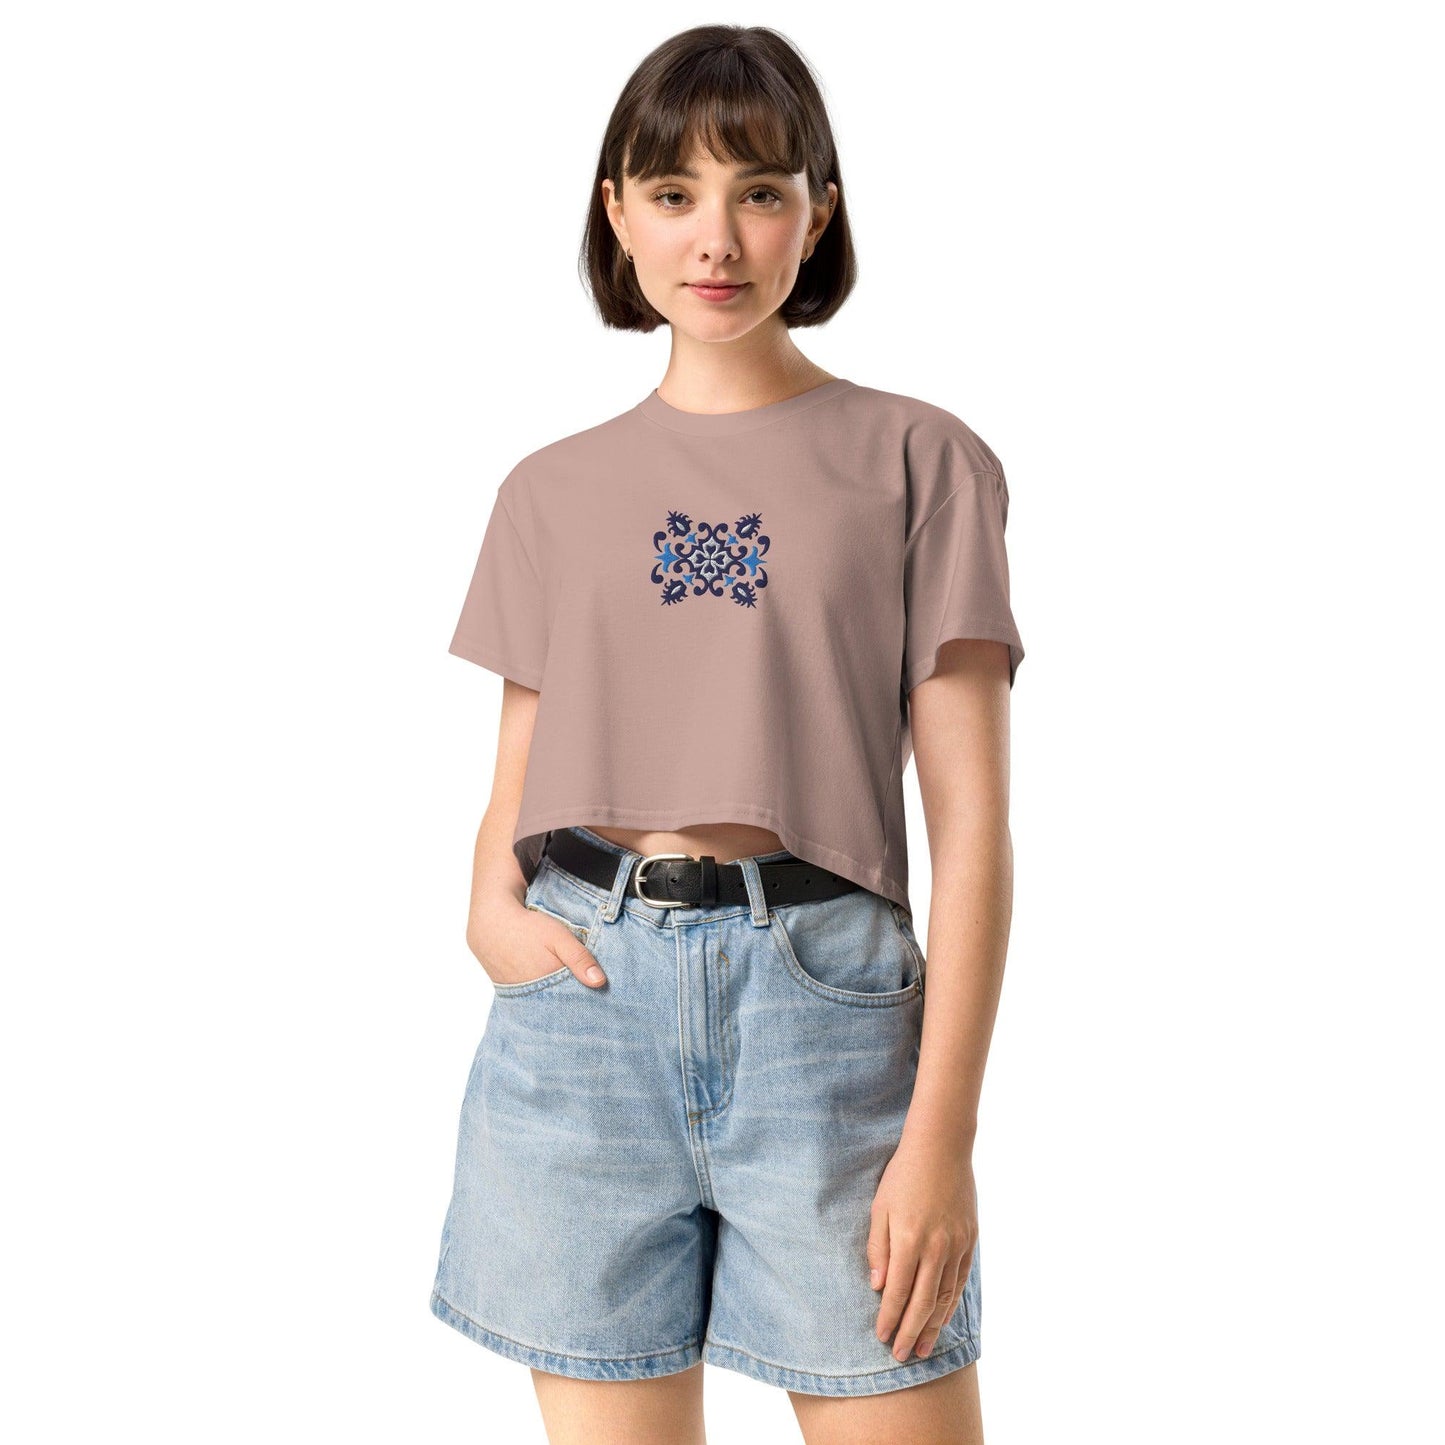 Portuguese Azulejo Tile Embroidered T-Shirt - The Global Wanderer